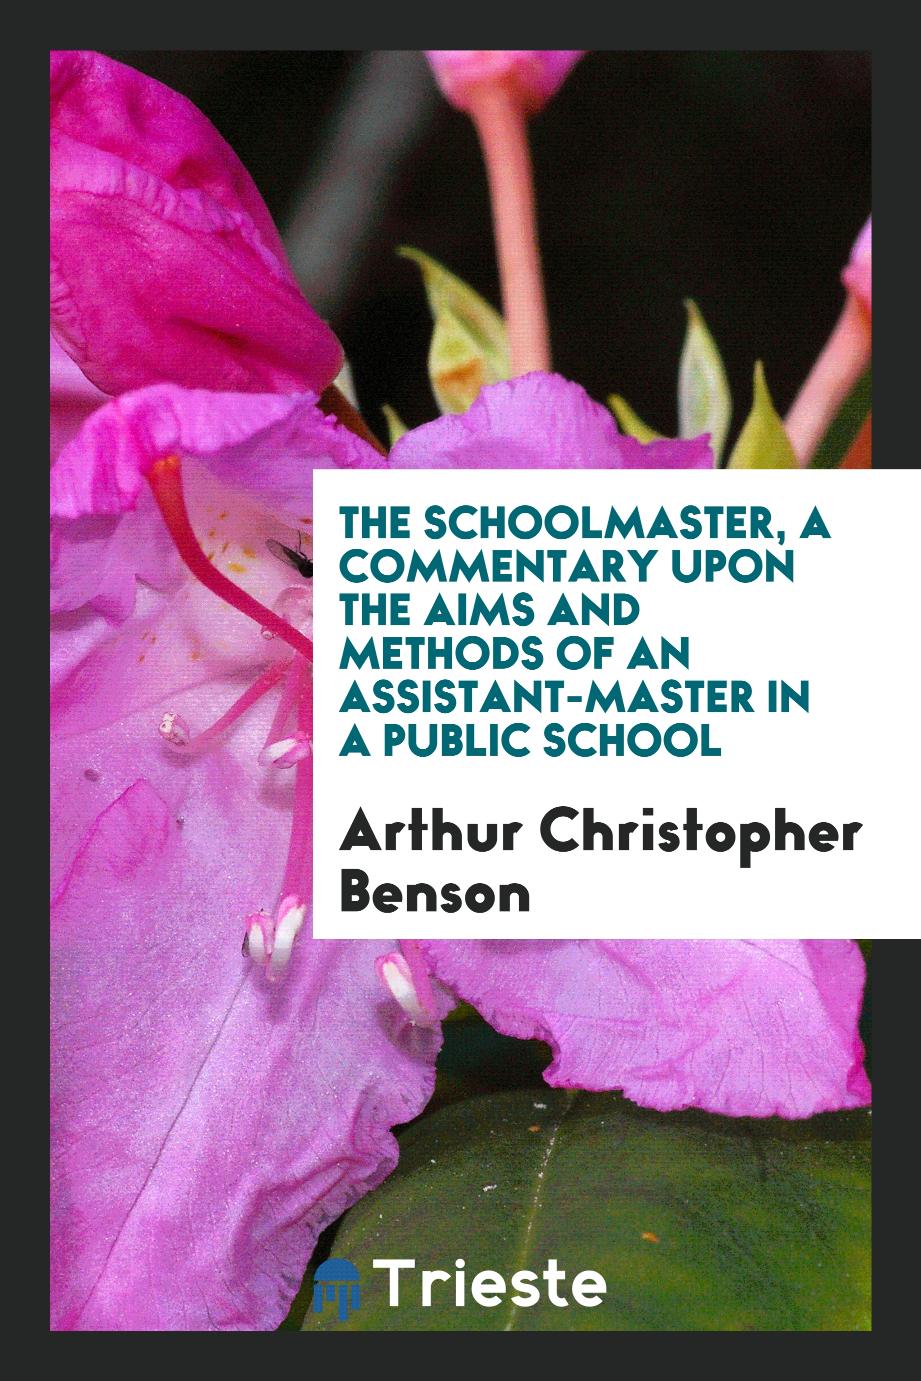 The schoolmaster, a commentary upon the aims and methods of an assistant-master in a public school